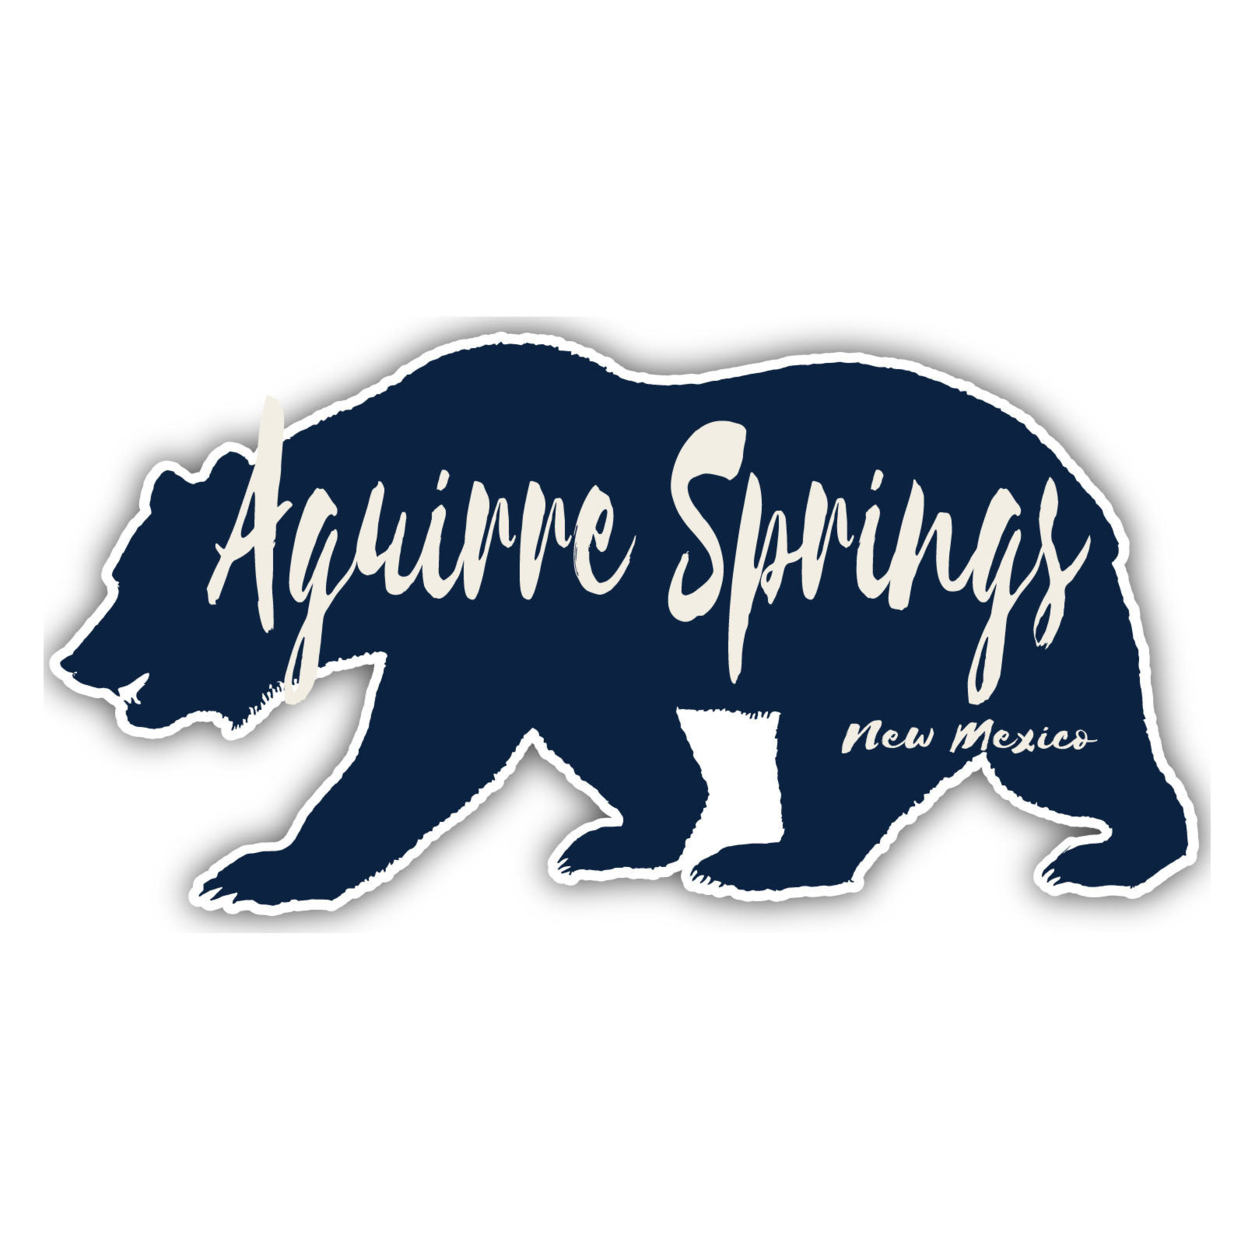 Aguirre Springs New Mexico Souvenir Decorative Stickers (Choose Theme And Size) - 4-Pack, 8-Inch, Bear